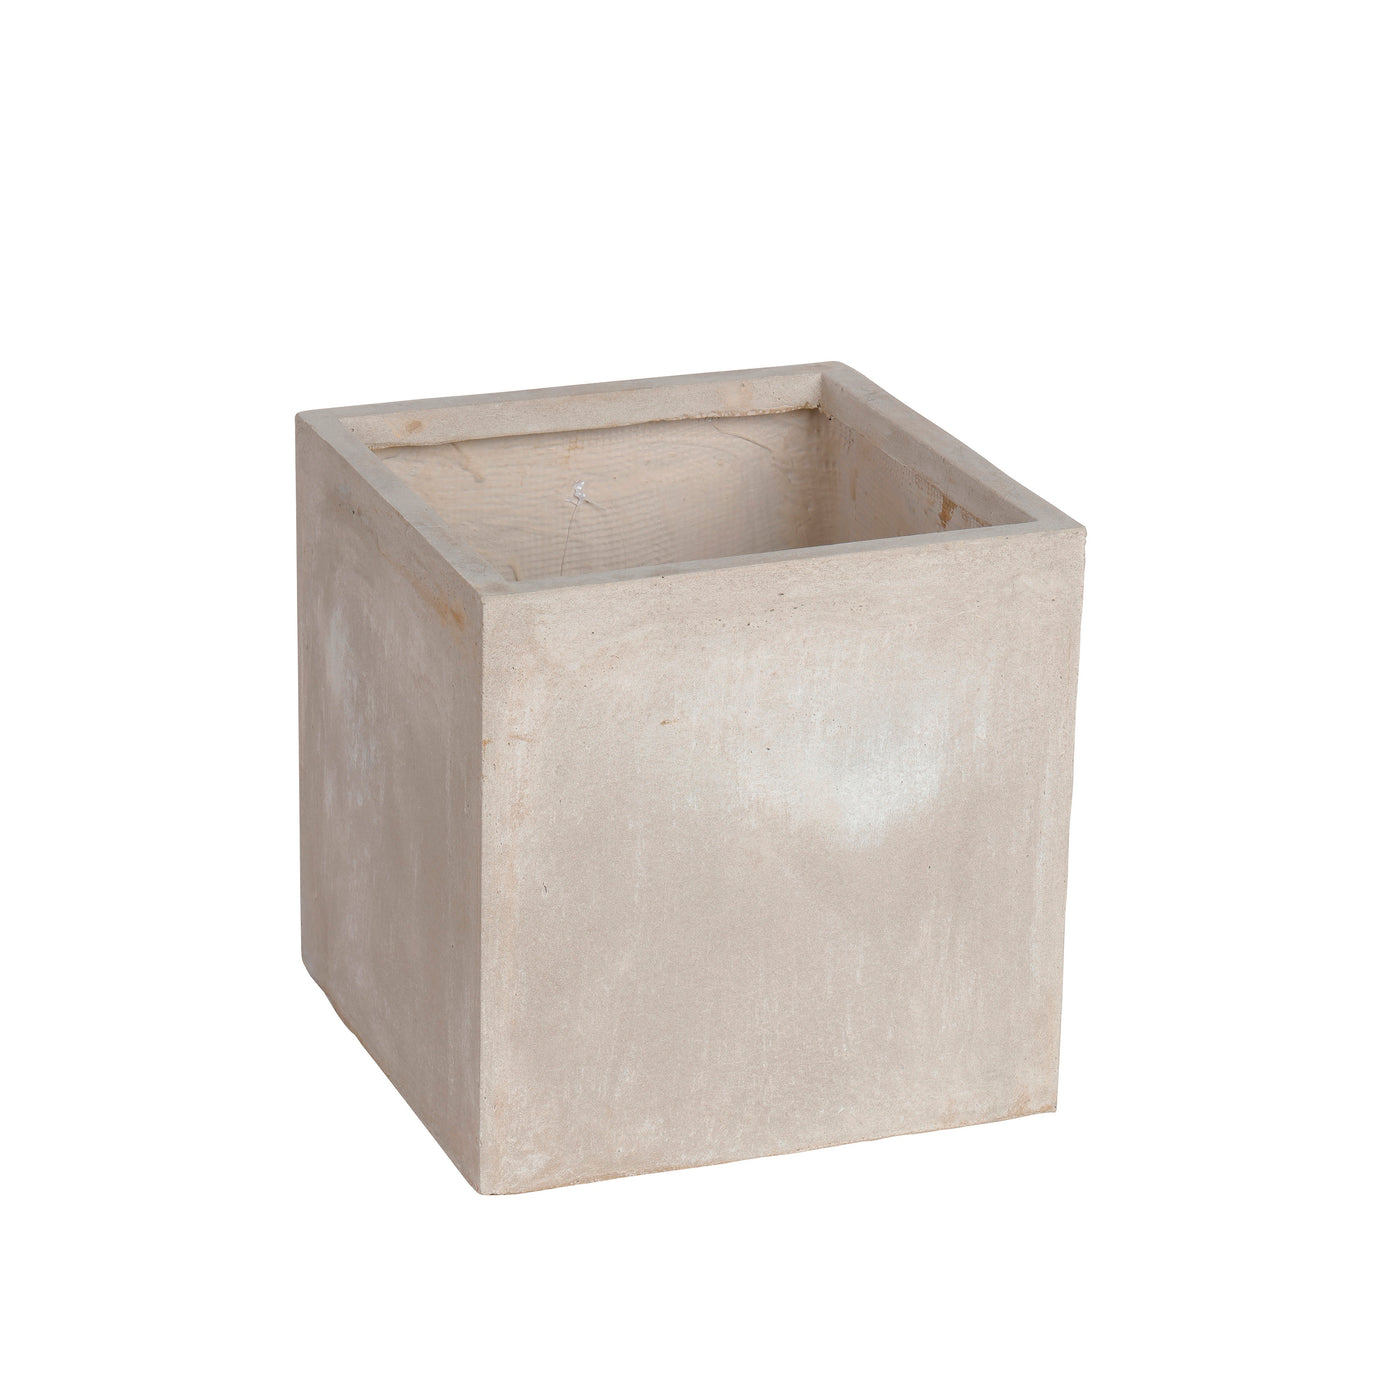 Handcrafted square stonecast planter in natural taupe